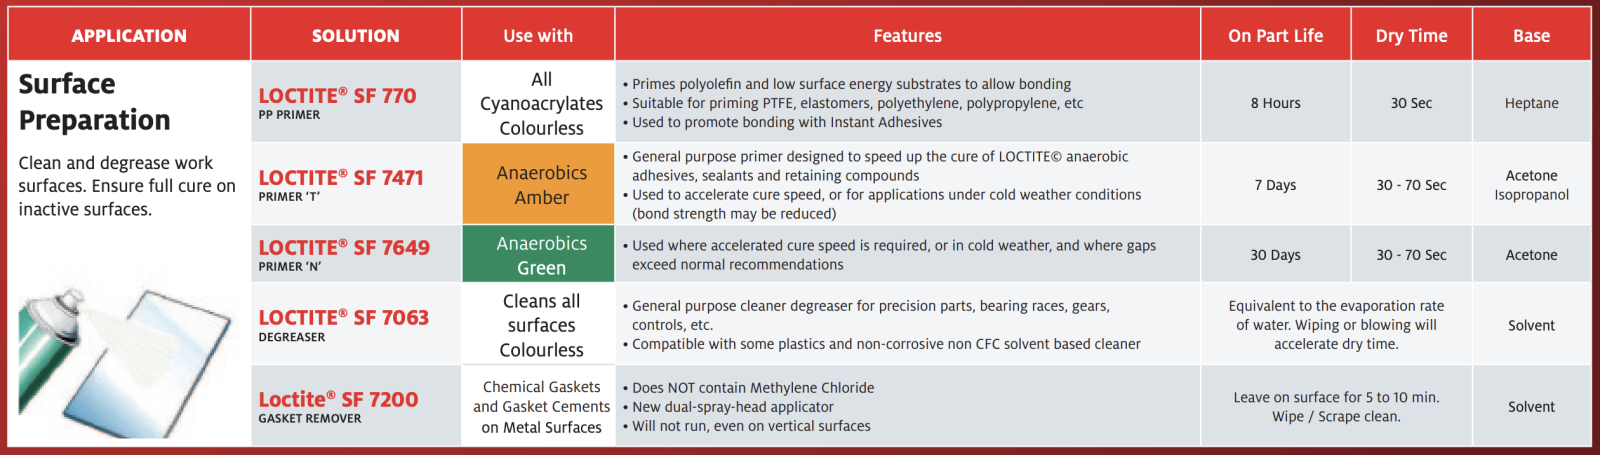 loctite for surface preparation